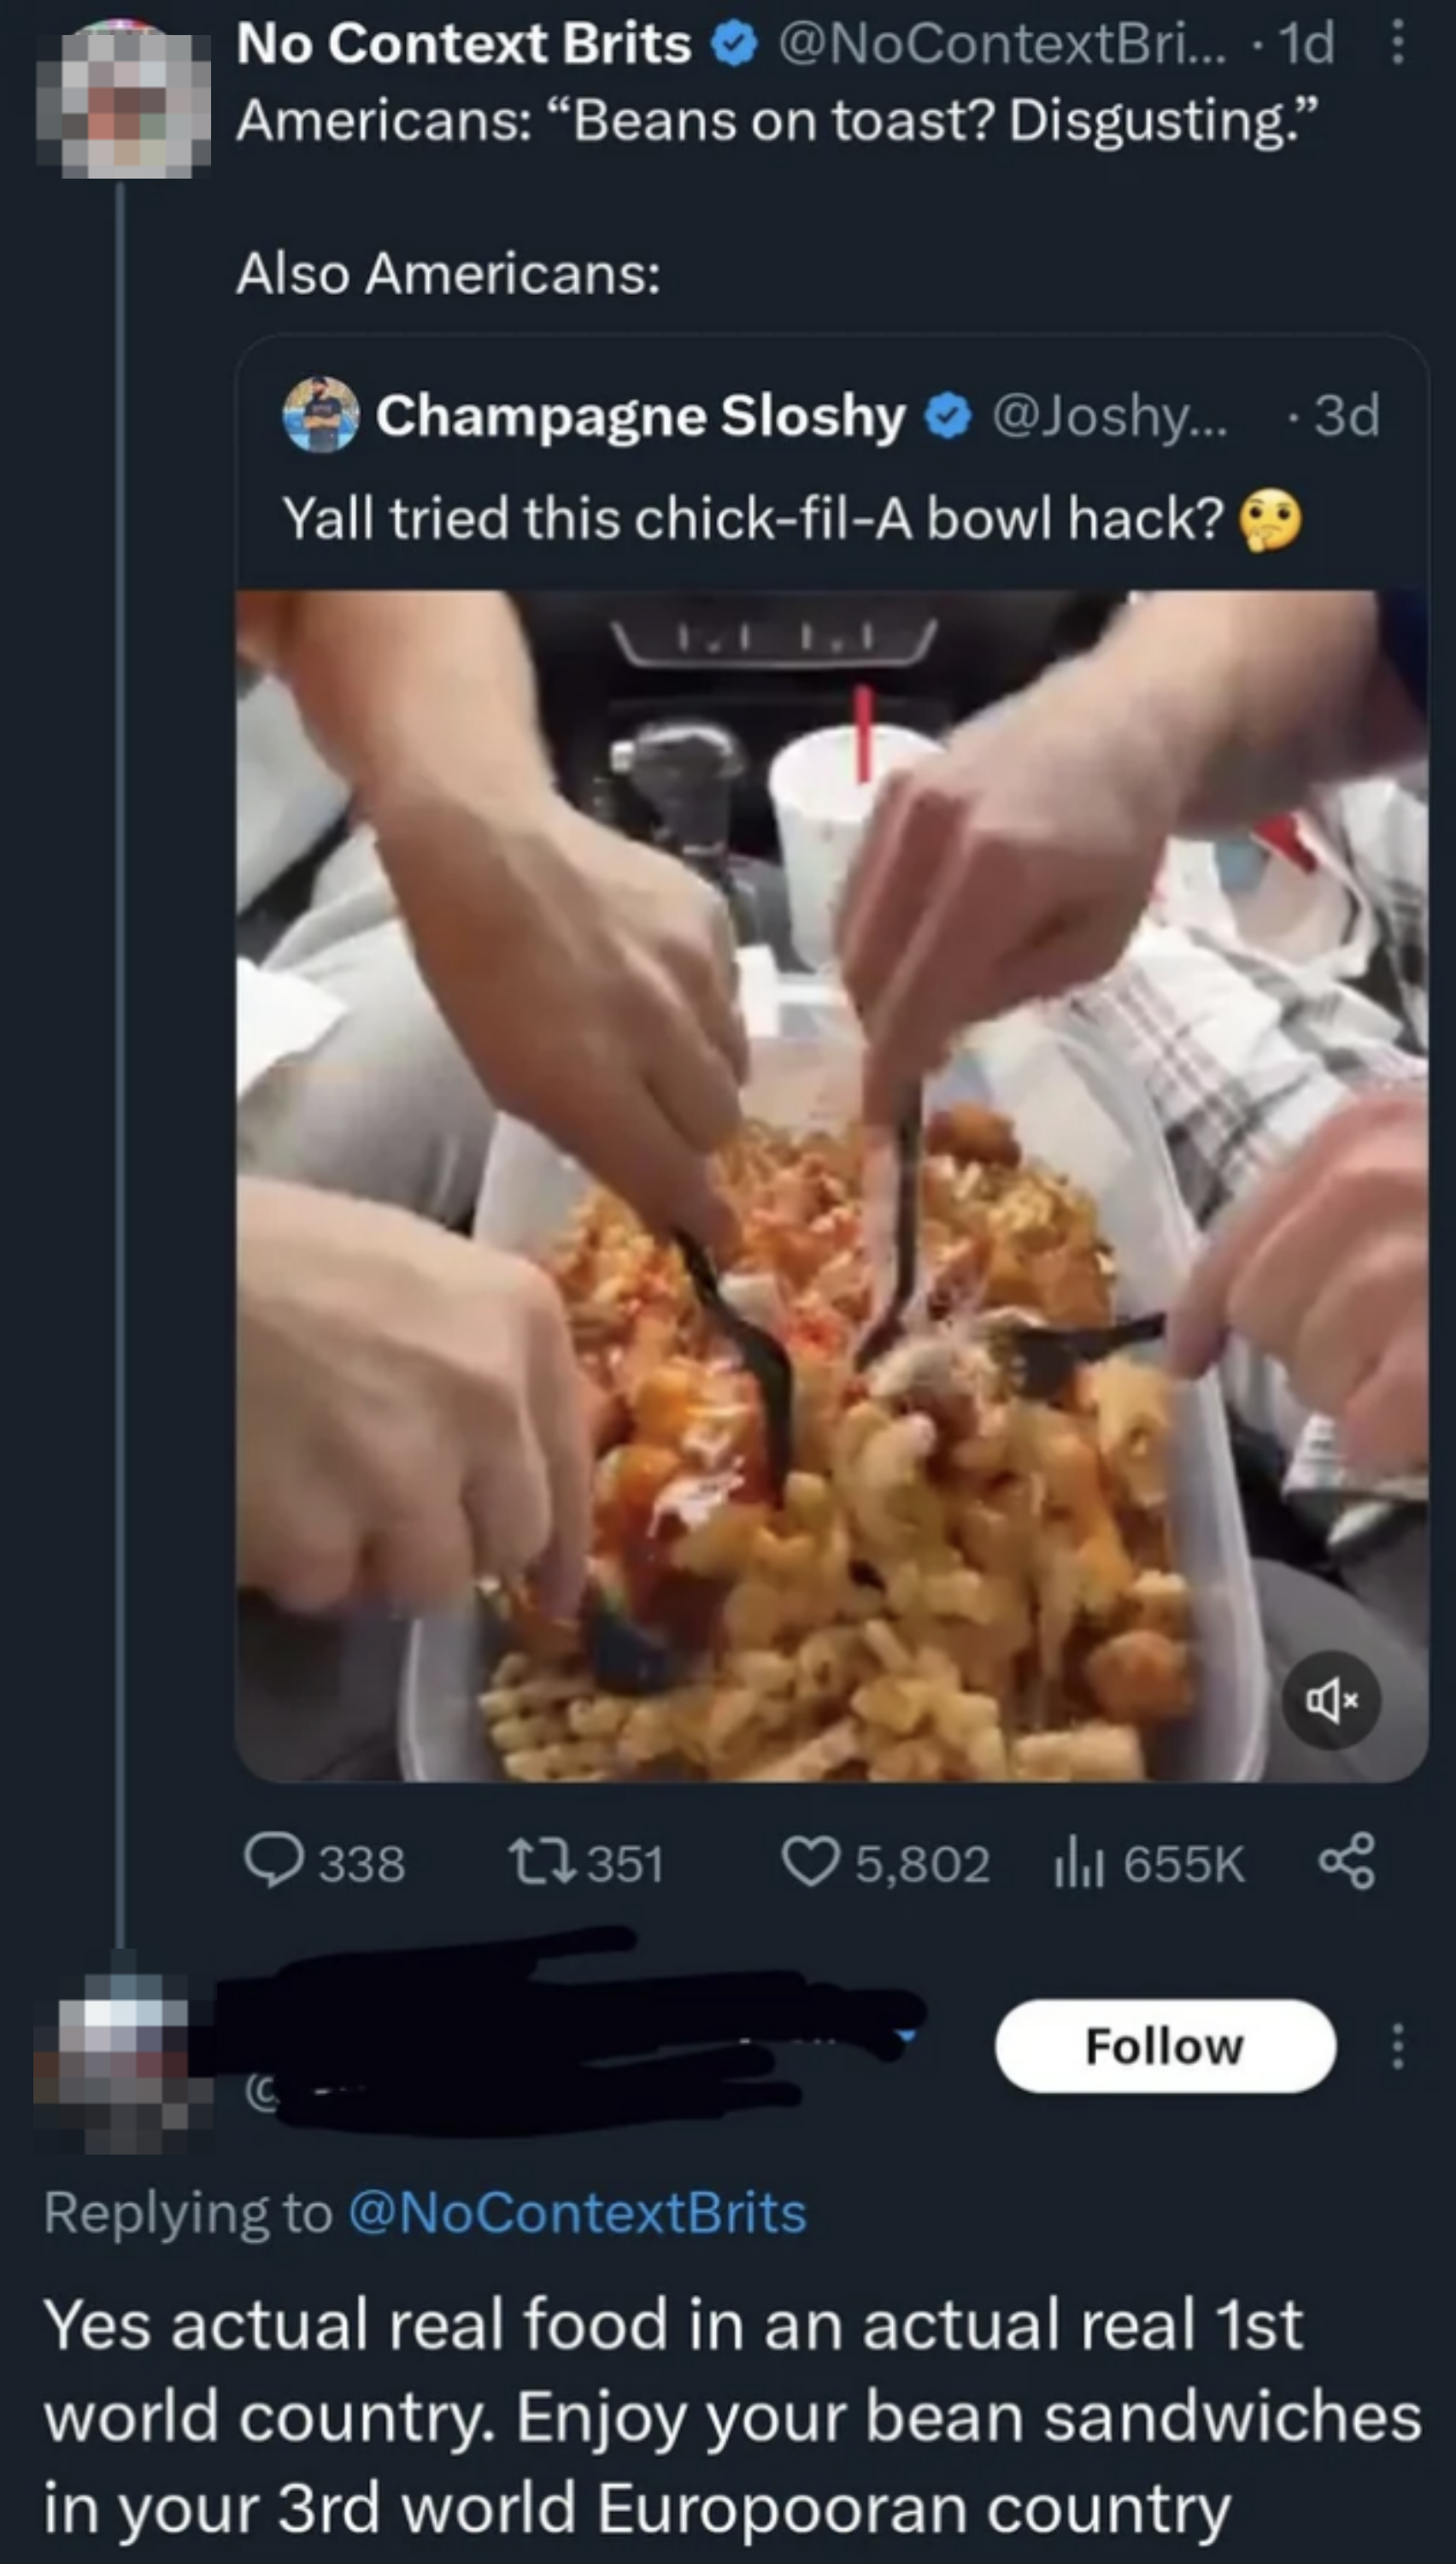 person making fun of american chik-fil-a concoction of cheese, sauce, chicken, and fries and american replying &quot;enjoy your bean sandwiches in your third world european country&quot;